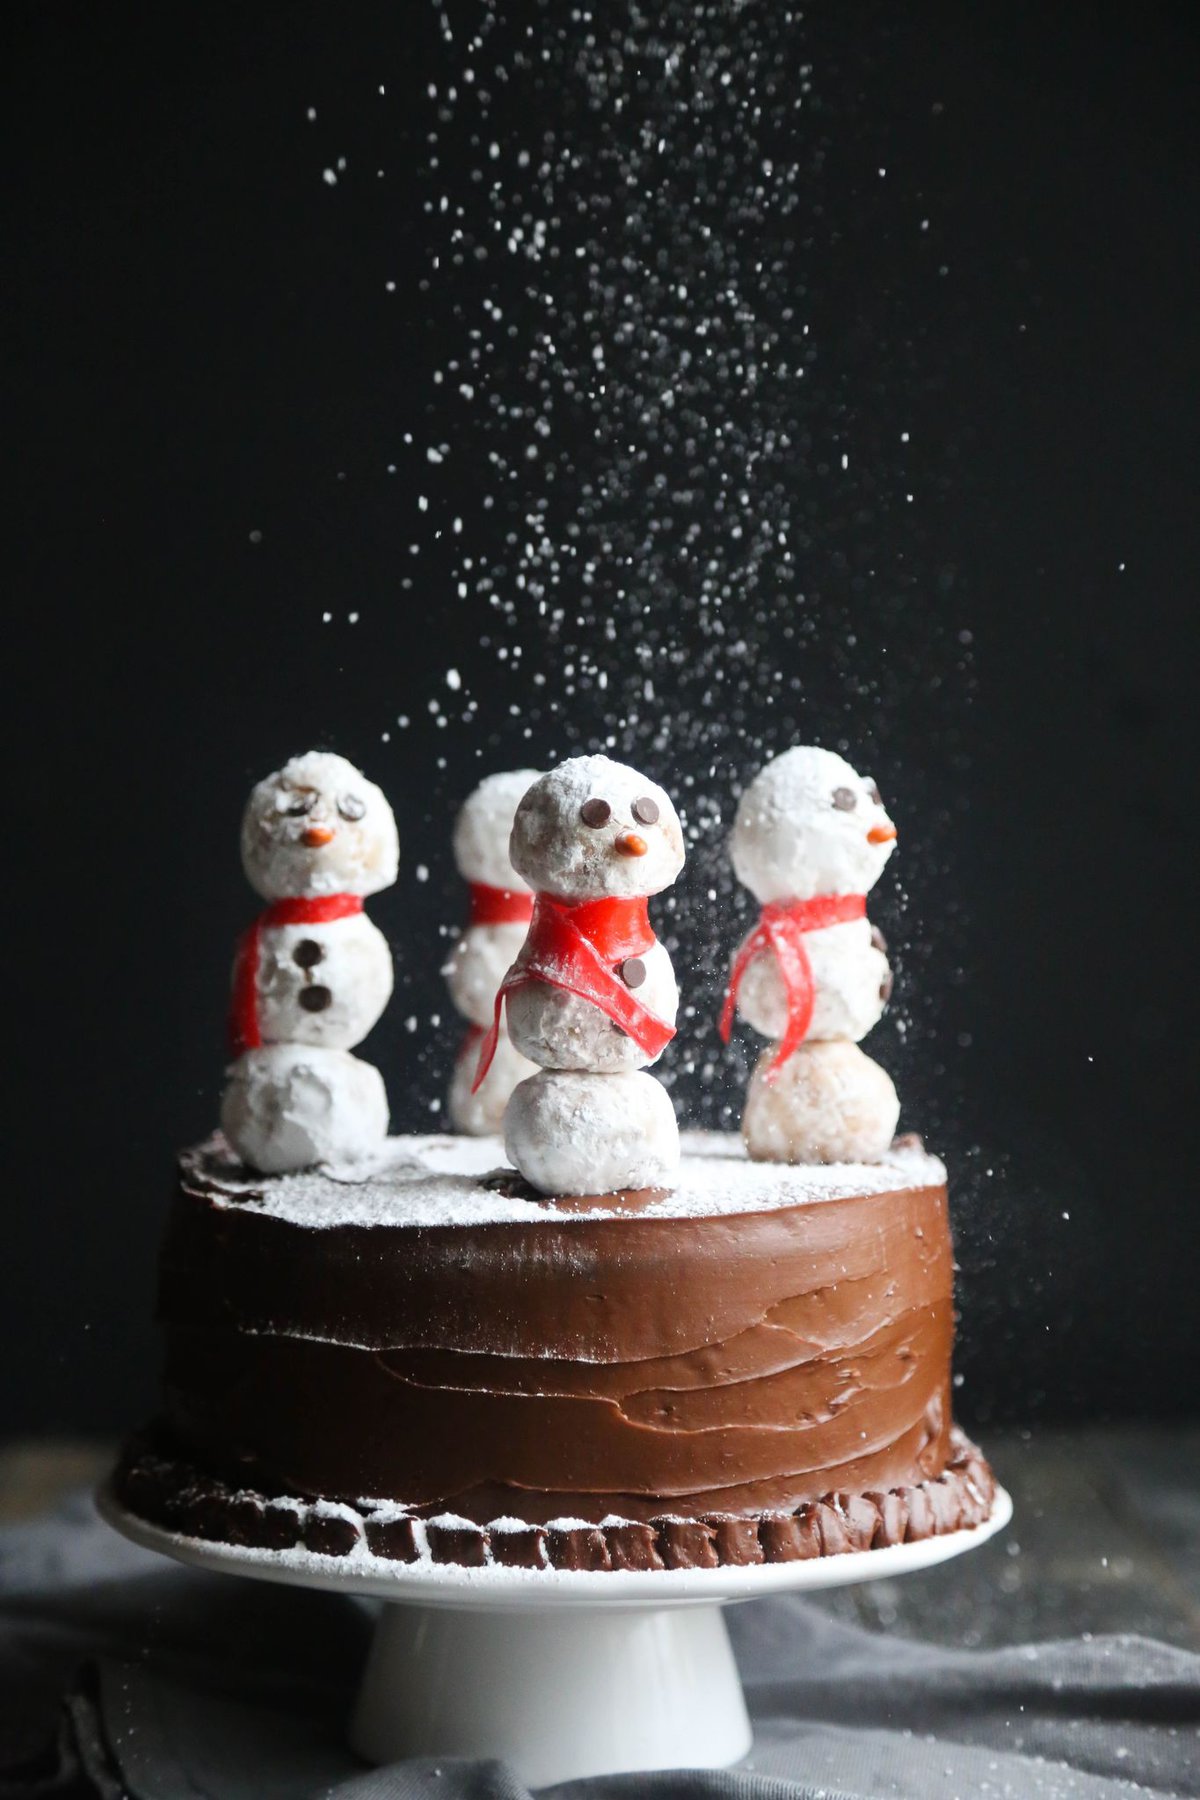 Snowman cake sprinkled with powdered sugar